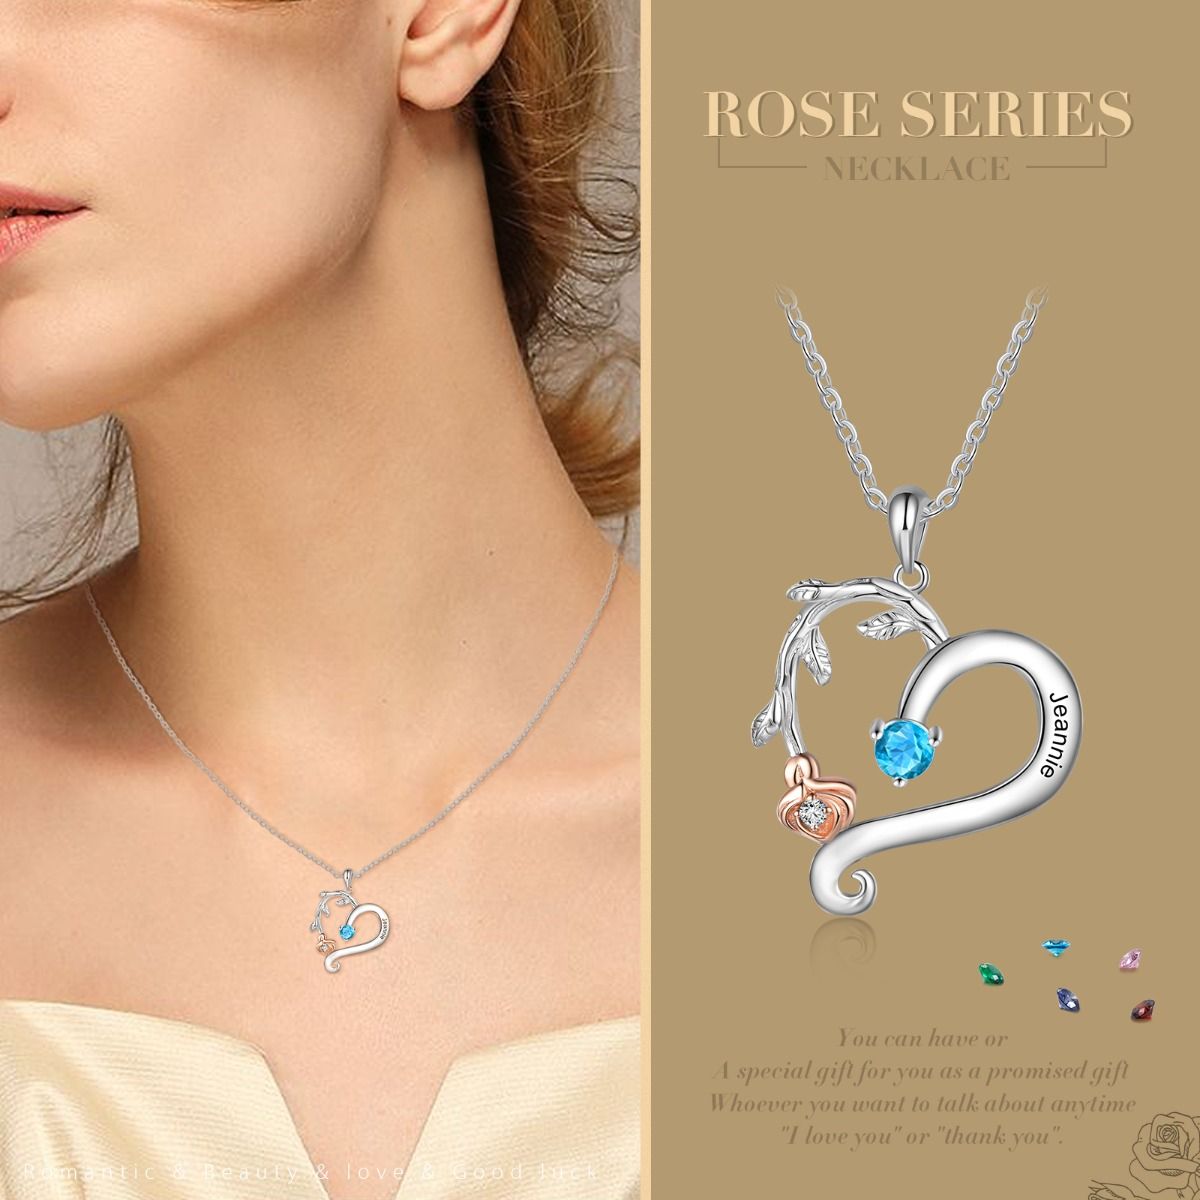 Personalised Rose Necklace With Up To 4 Birthstones | Bespoke Engraved Names Necklace With Birthstones